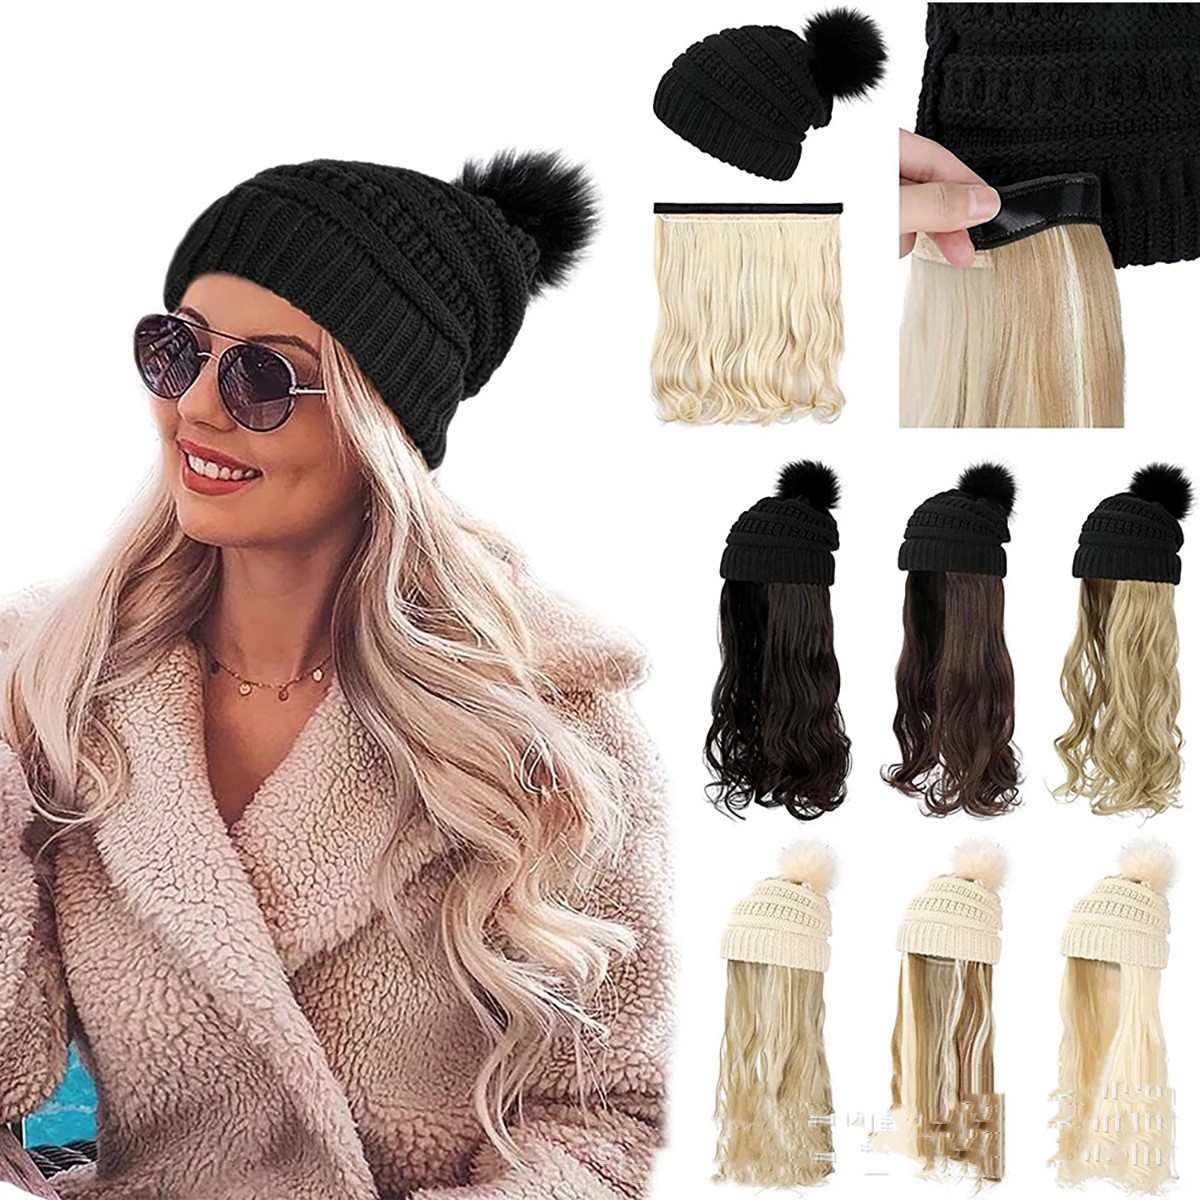 Chic Hat Wigs: Elevate style seamlessly with this versatile fashion fusion .image 16